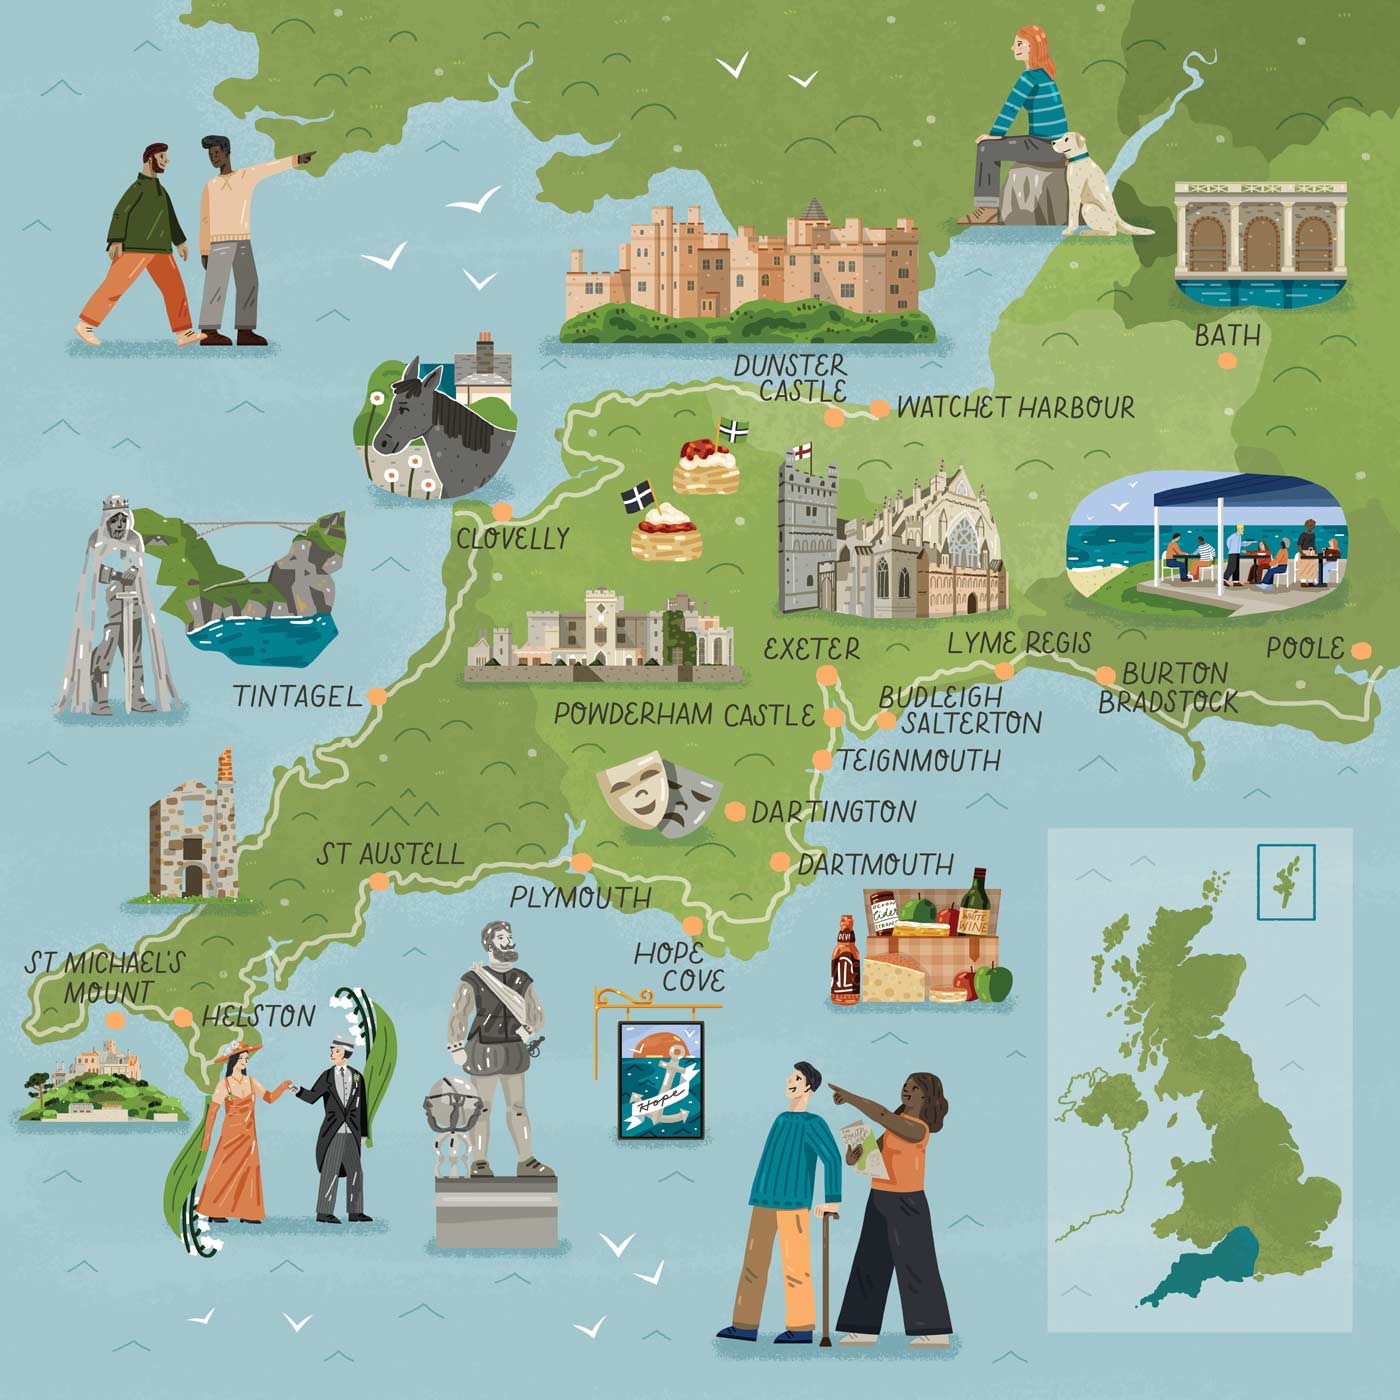 South West Illustrated Map portfolio cover image